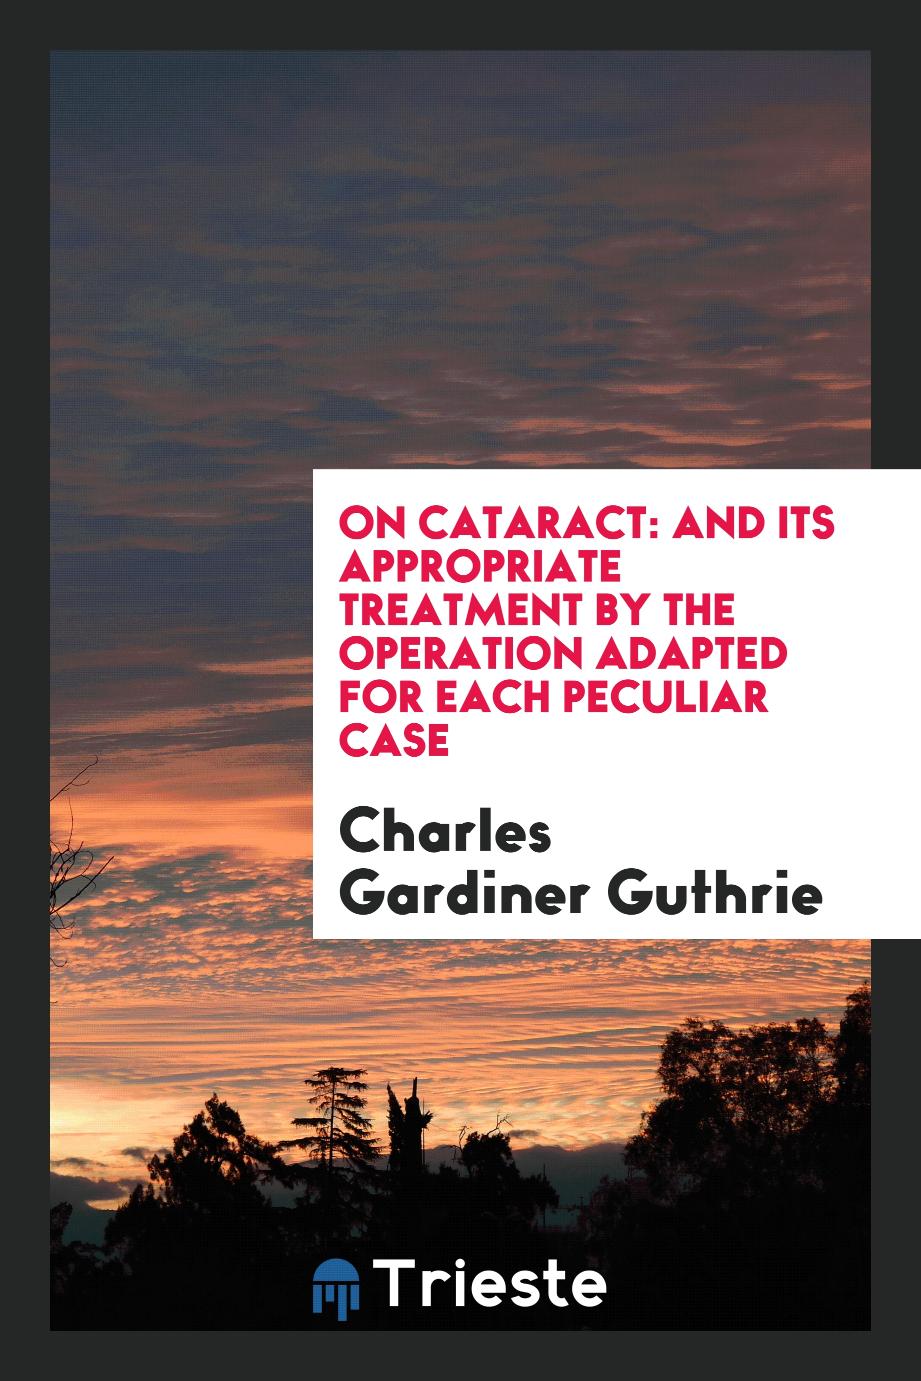 On Cataract: And Its Appropriate Treatment by the Operation Adapted for Each Peculiar Case